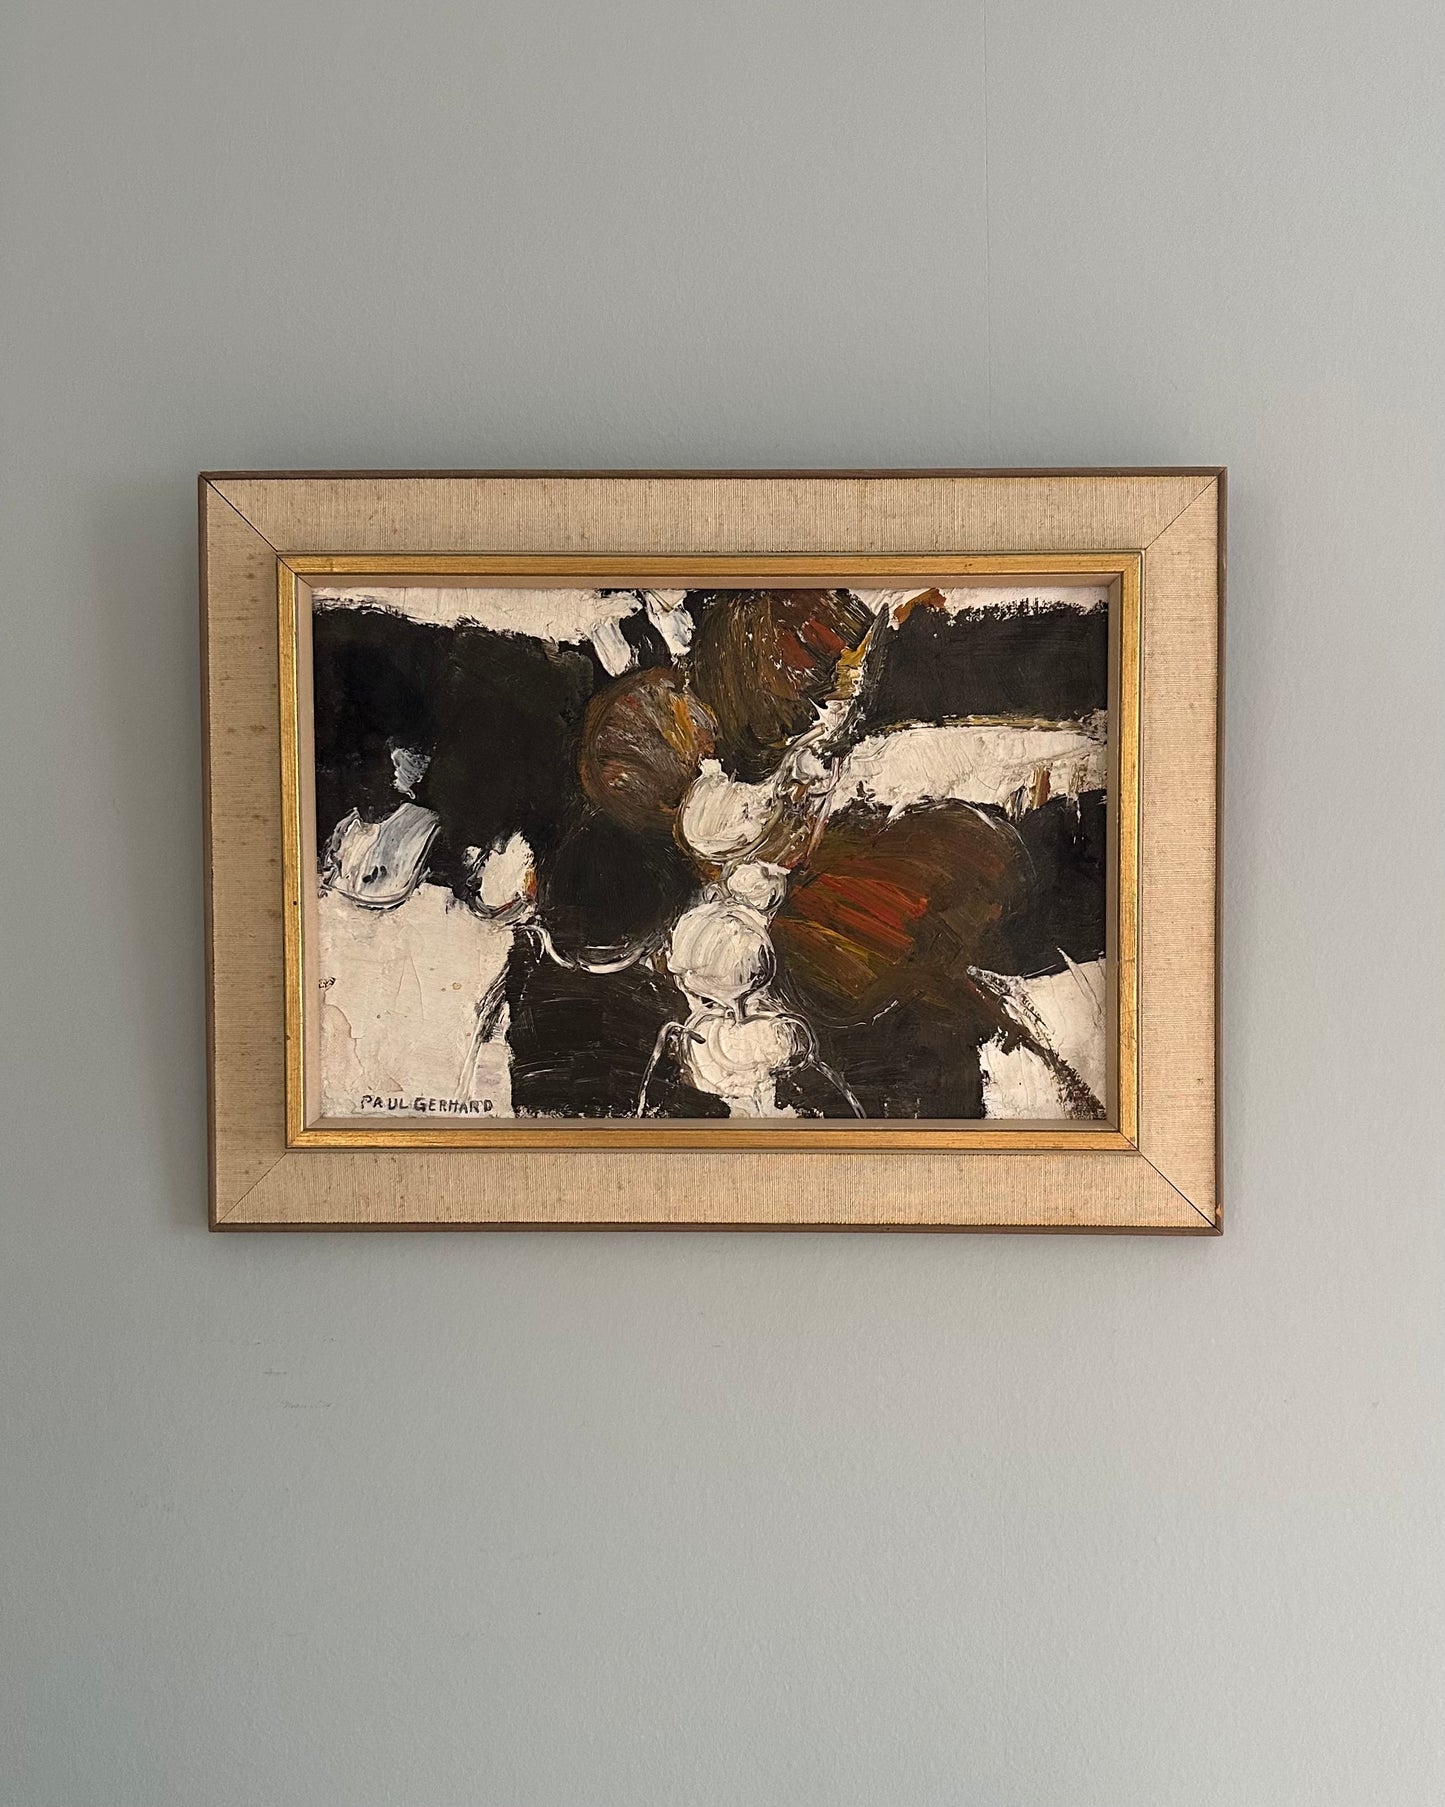 Vintage Abstract Oil Painting